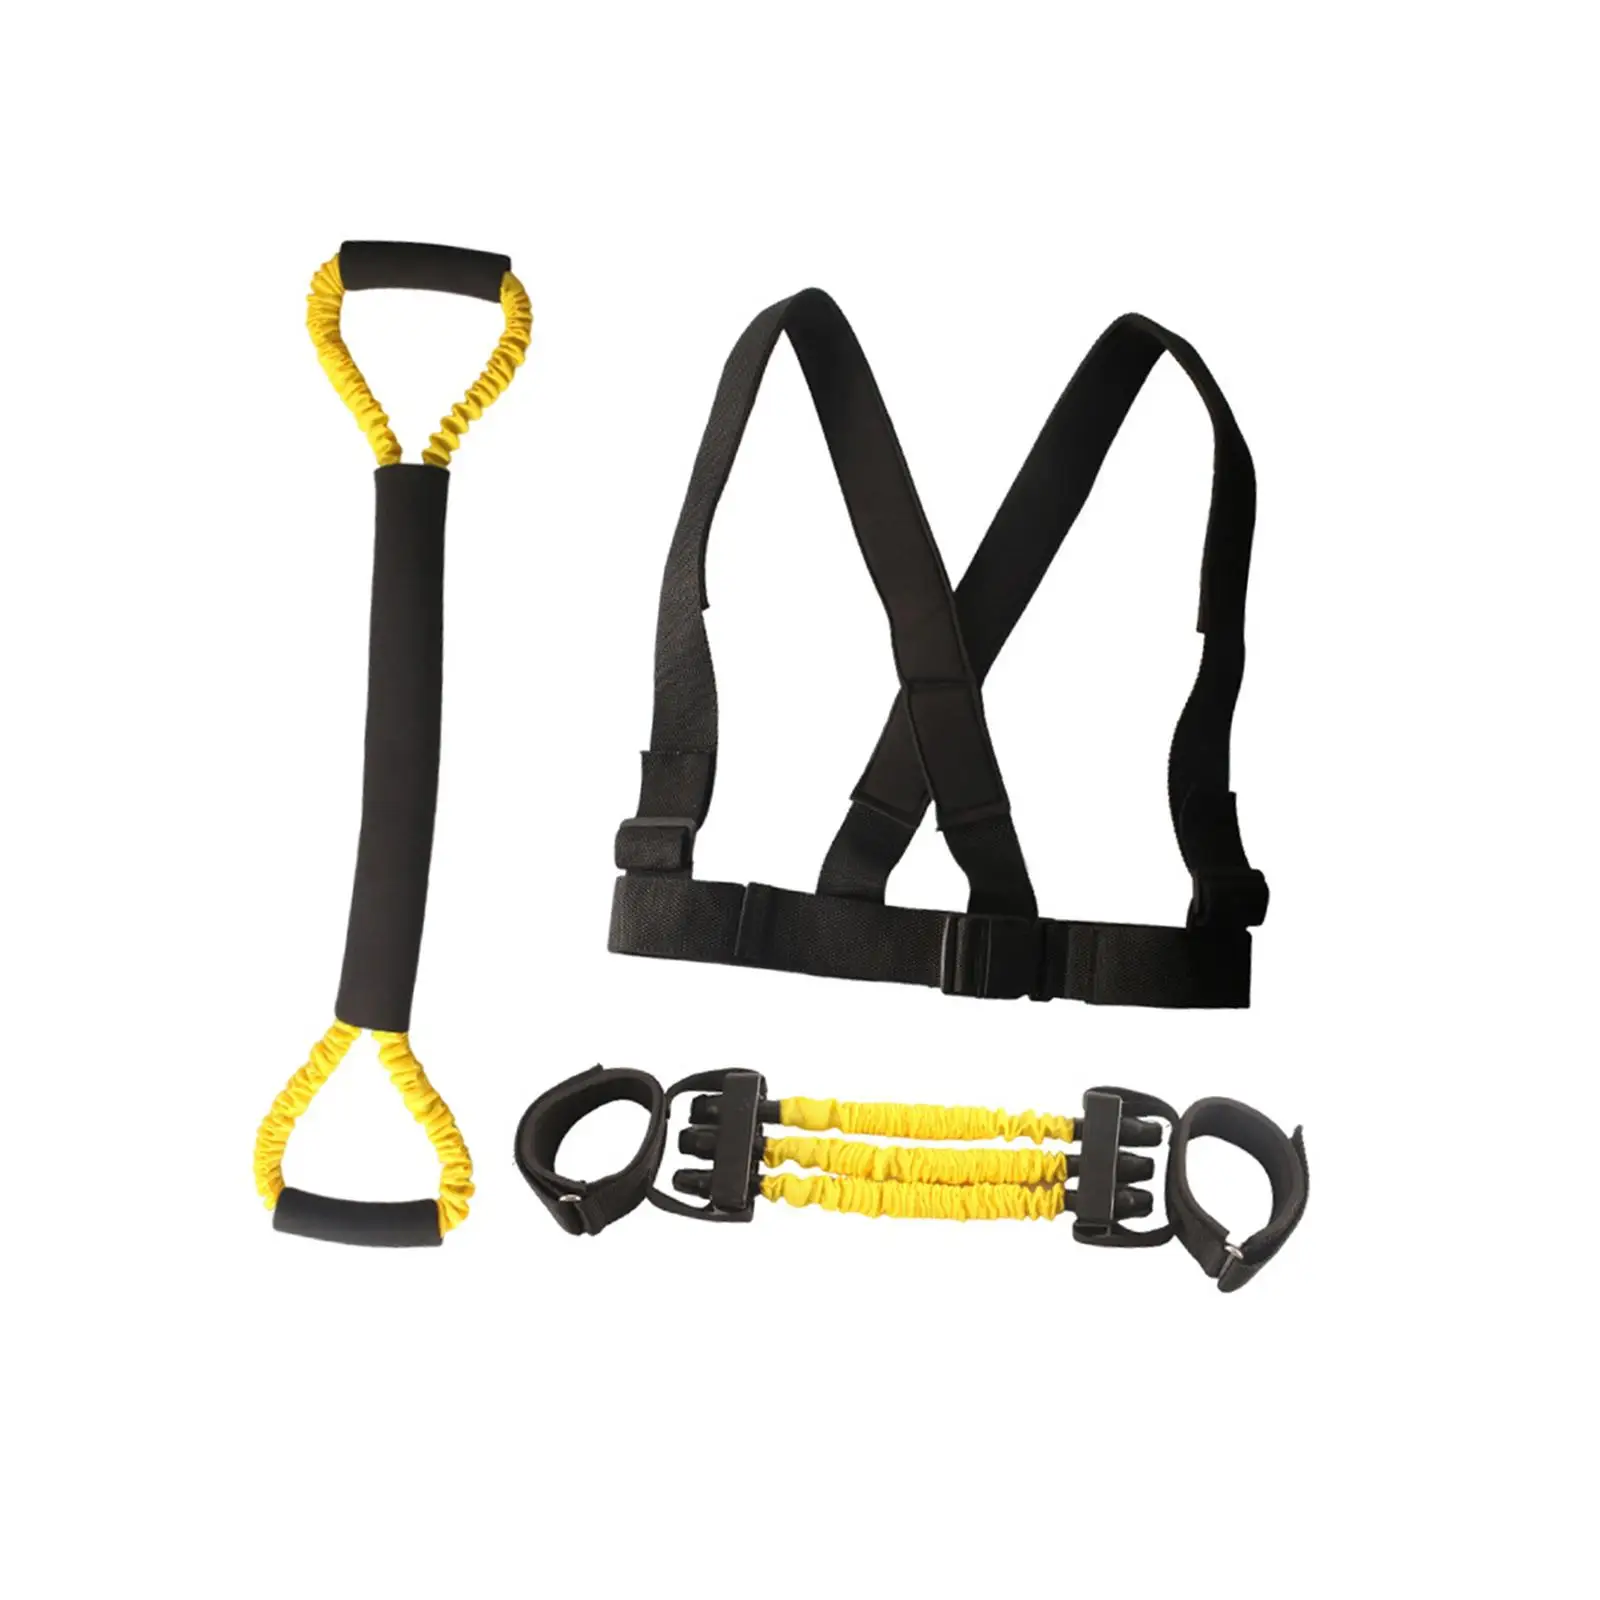 Exercise Band Workout Comfortable Grip Pulling Rope Boxing Resistance Bands for Yoga Mma Shadow Boxing Basketball Volleyball